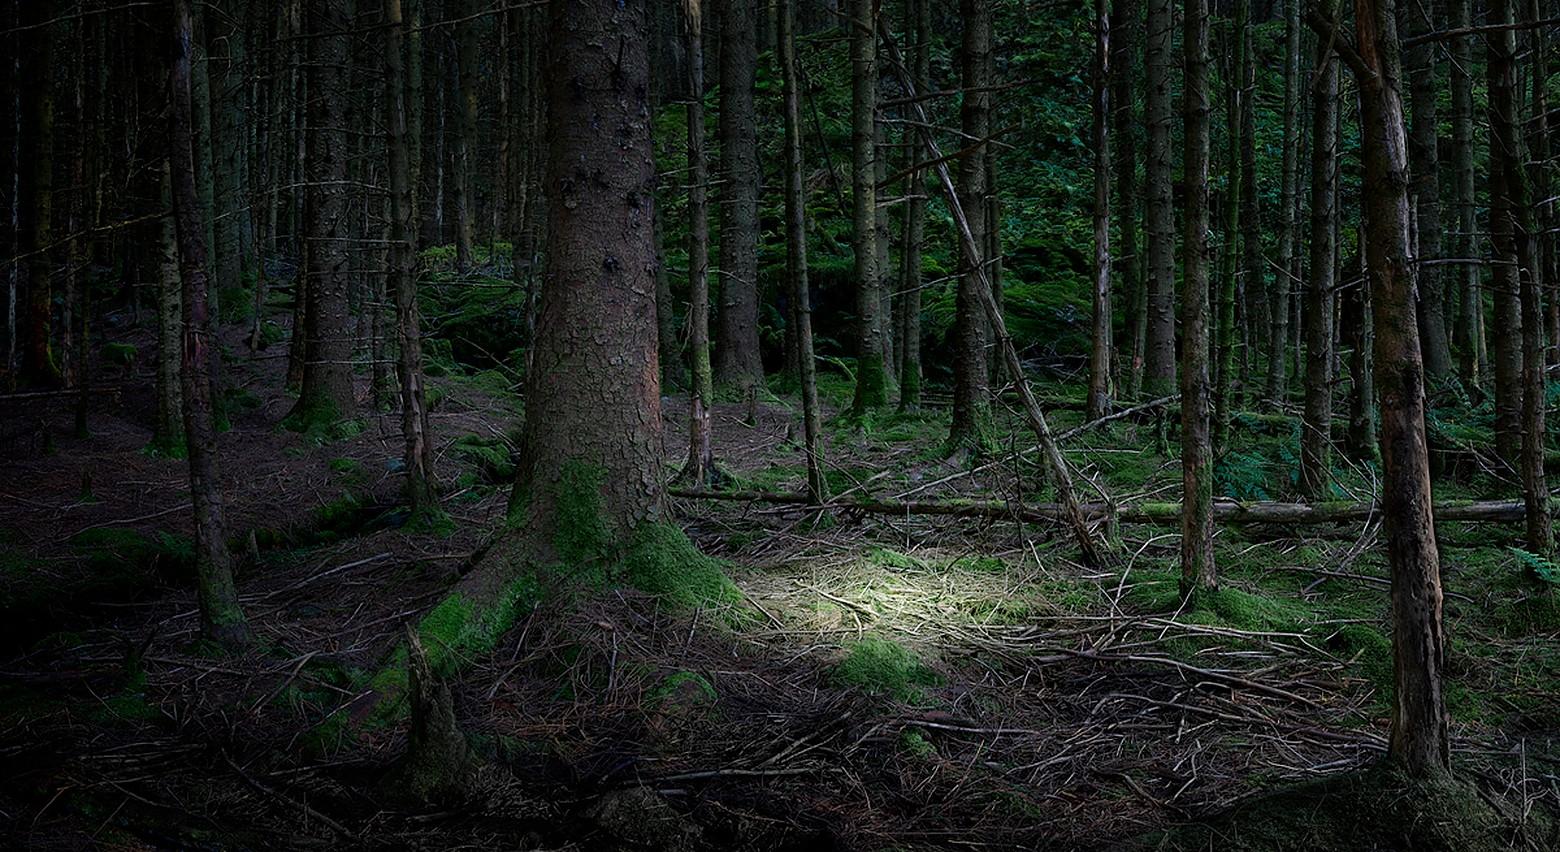 The Gloaming 4 - Ellie Davies, Nature, Photography, Trees, Landscape, Forests